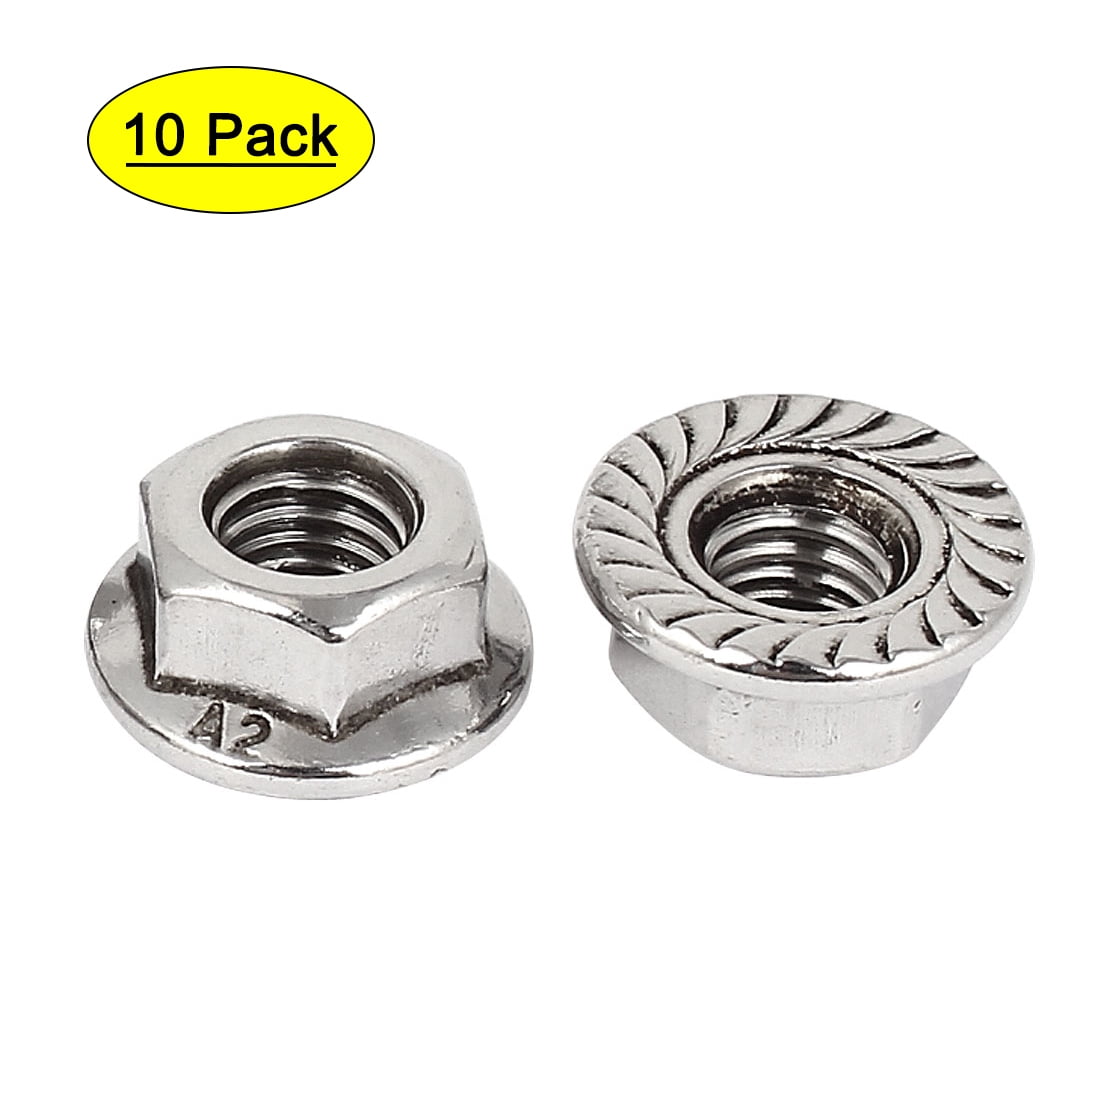 1/4"-20 NUTS 18-8 Stainless Steel Hex Cap Serrated Flange Nut 50 